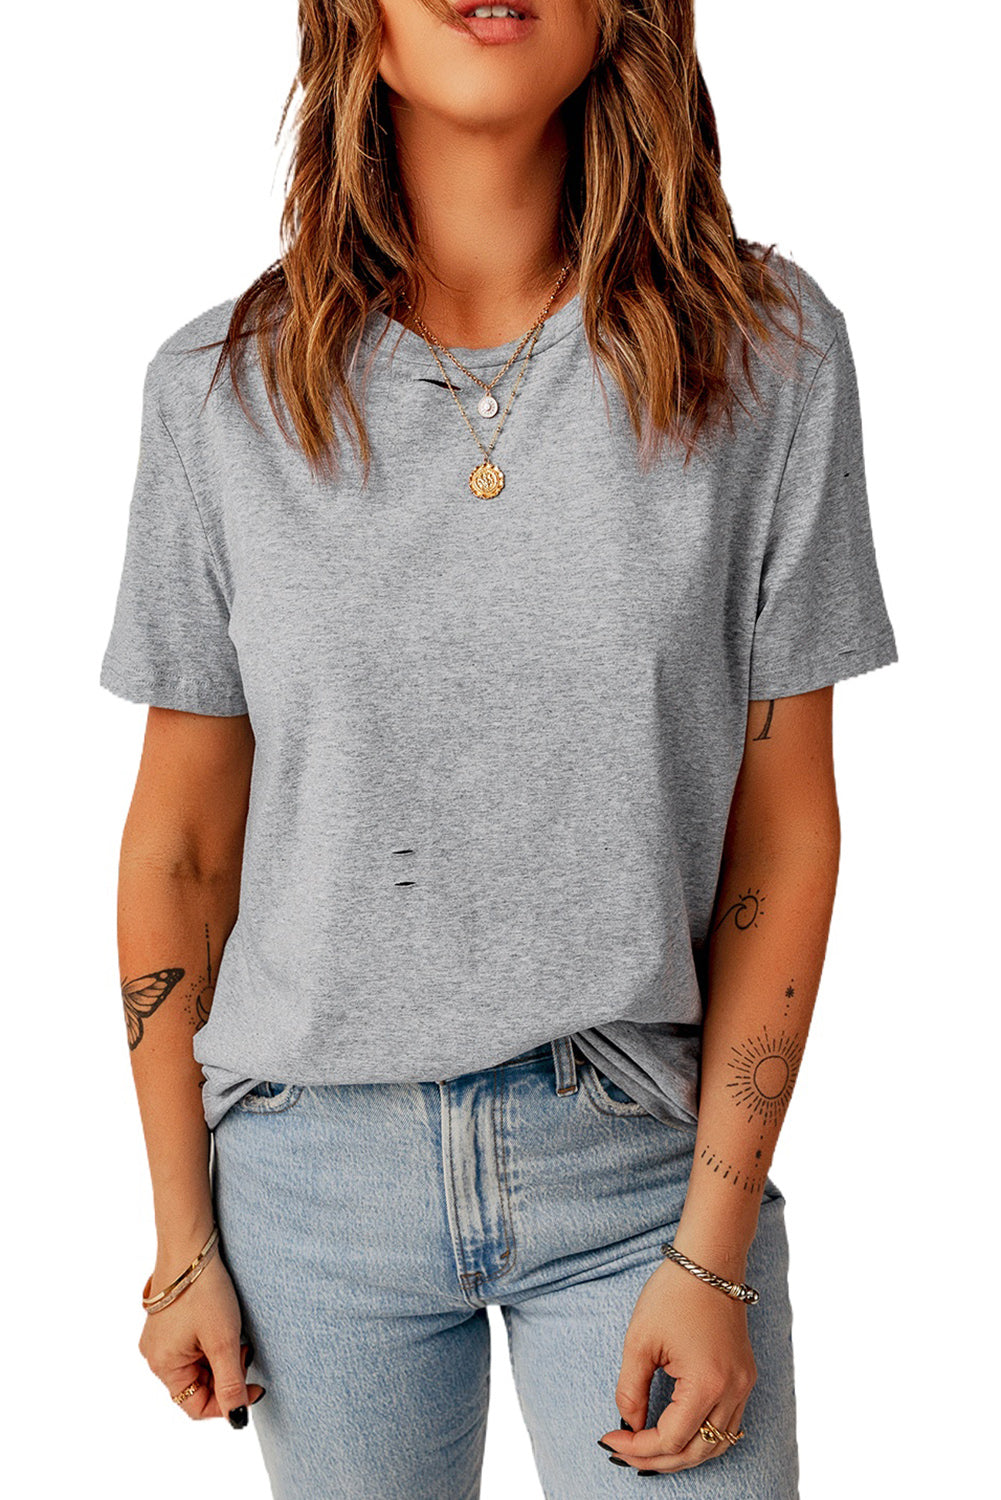 Gray Ripped Solid Color Short Sleeve T Shirt